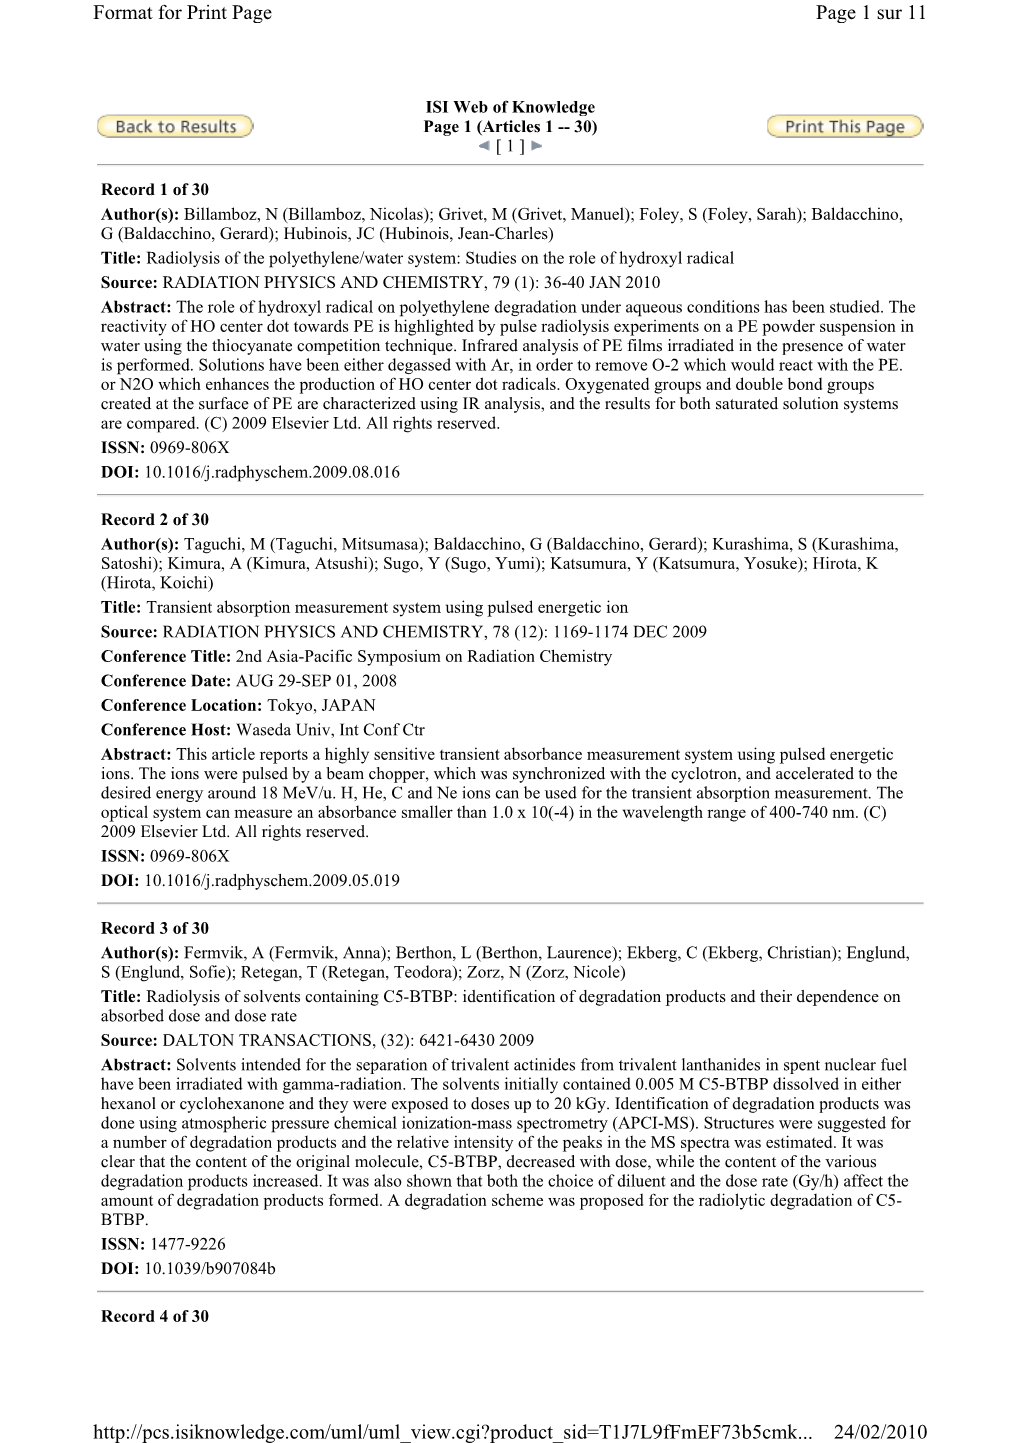 Page 1 Sur 11 Format for Print Page 24/02/2010